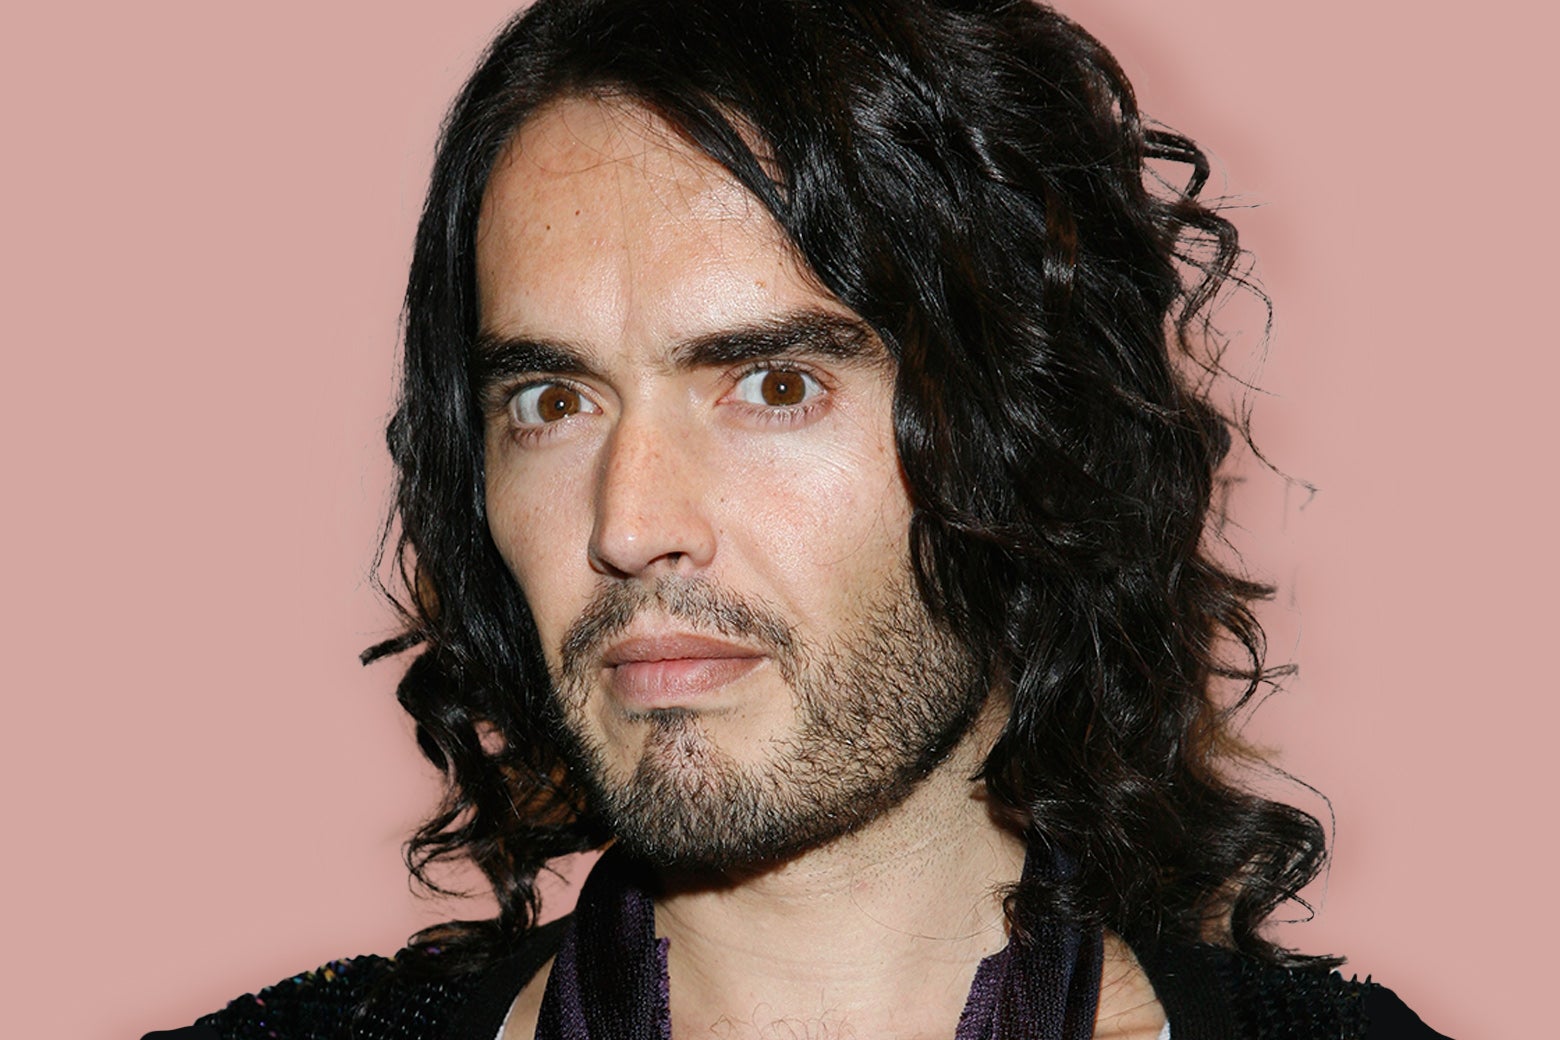 Russell Brand looks into the camera over a pink background.